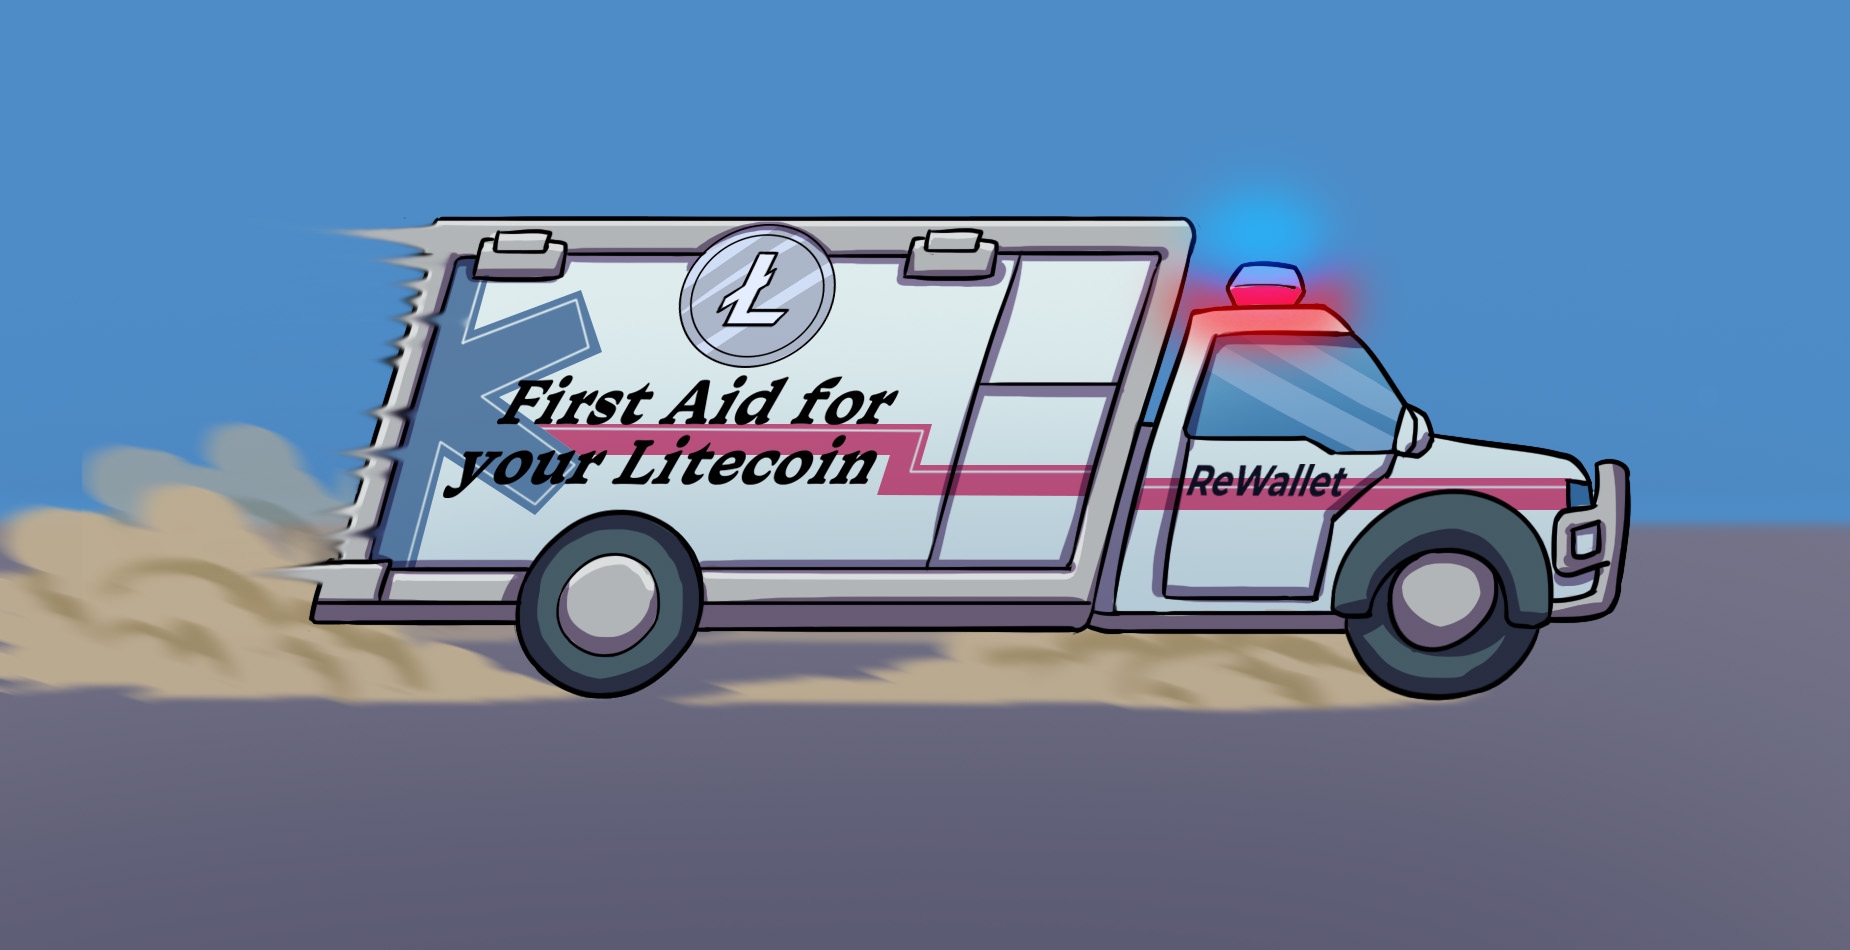 An ambulance with the inscription "First Aid for your Litecoin", in fast motion with sirens turned on.